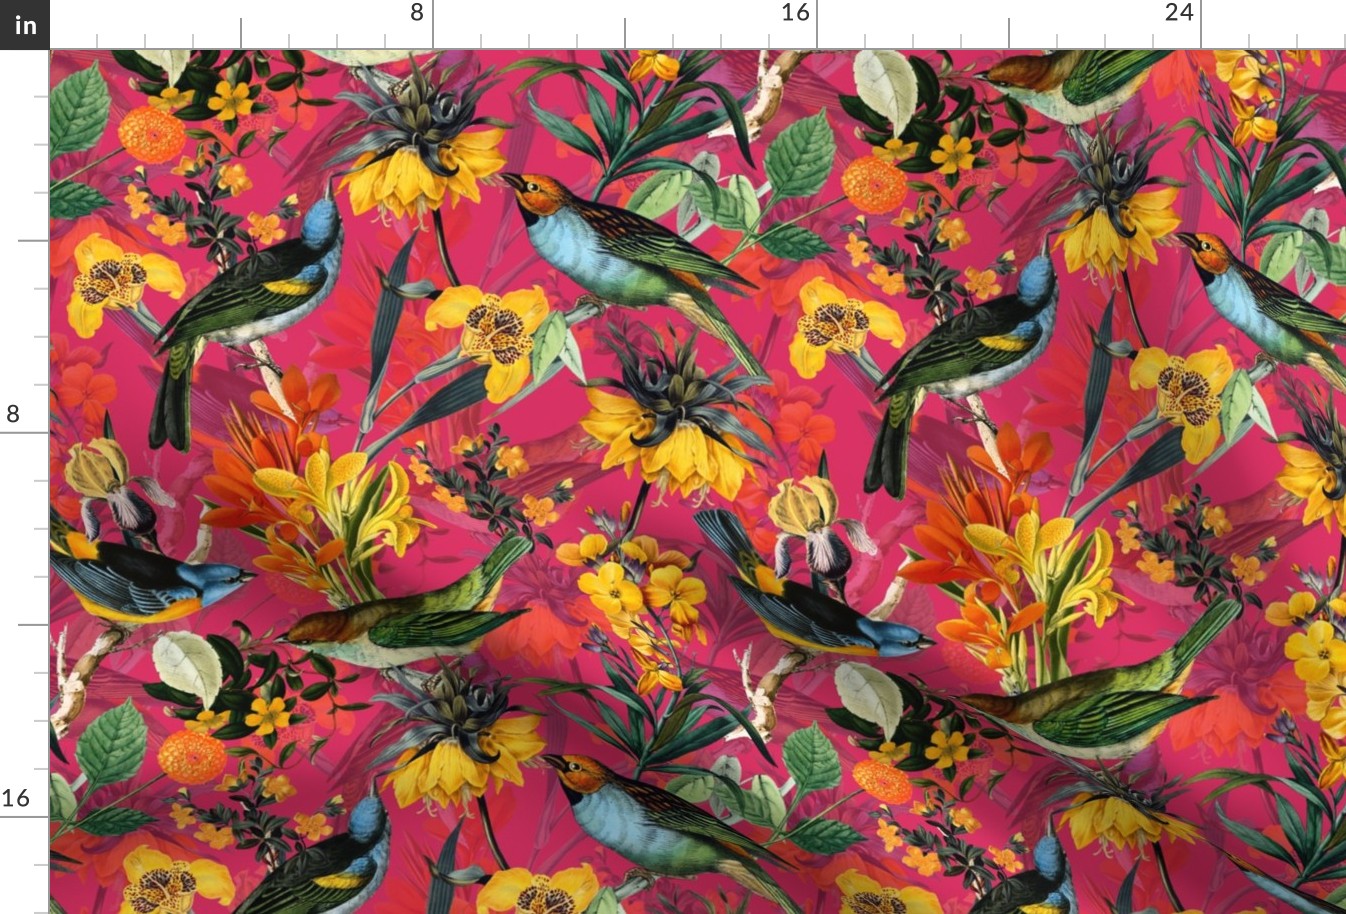 13" Antique birds and Red flowers on yellow, antique bird fabric, birds fabric on red double